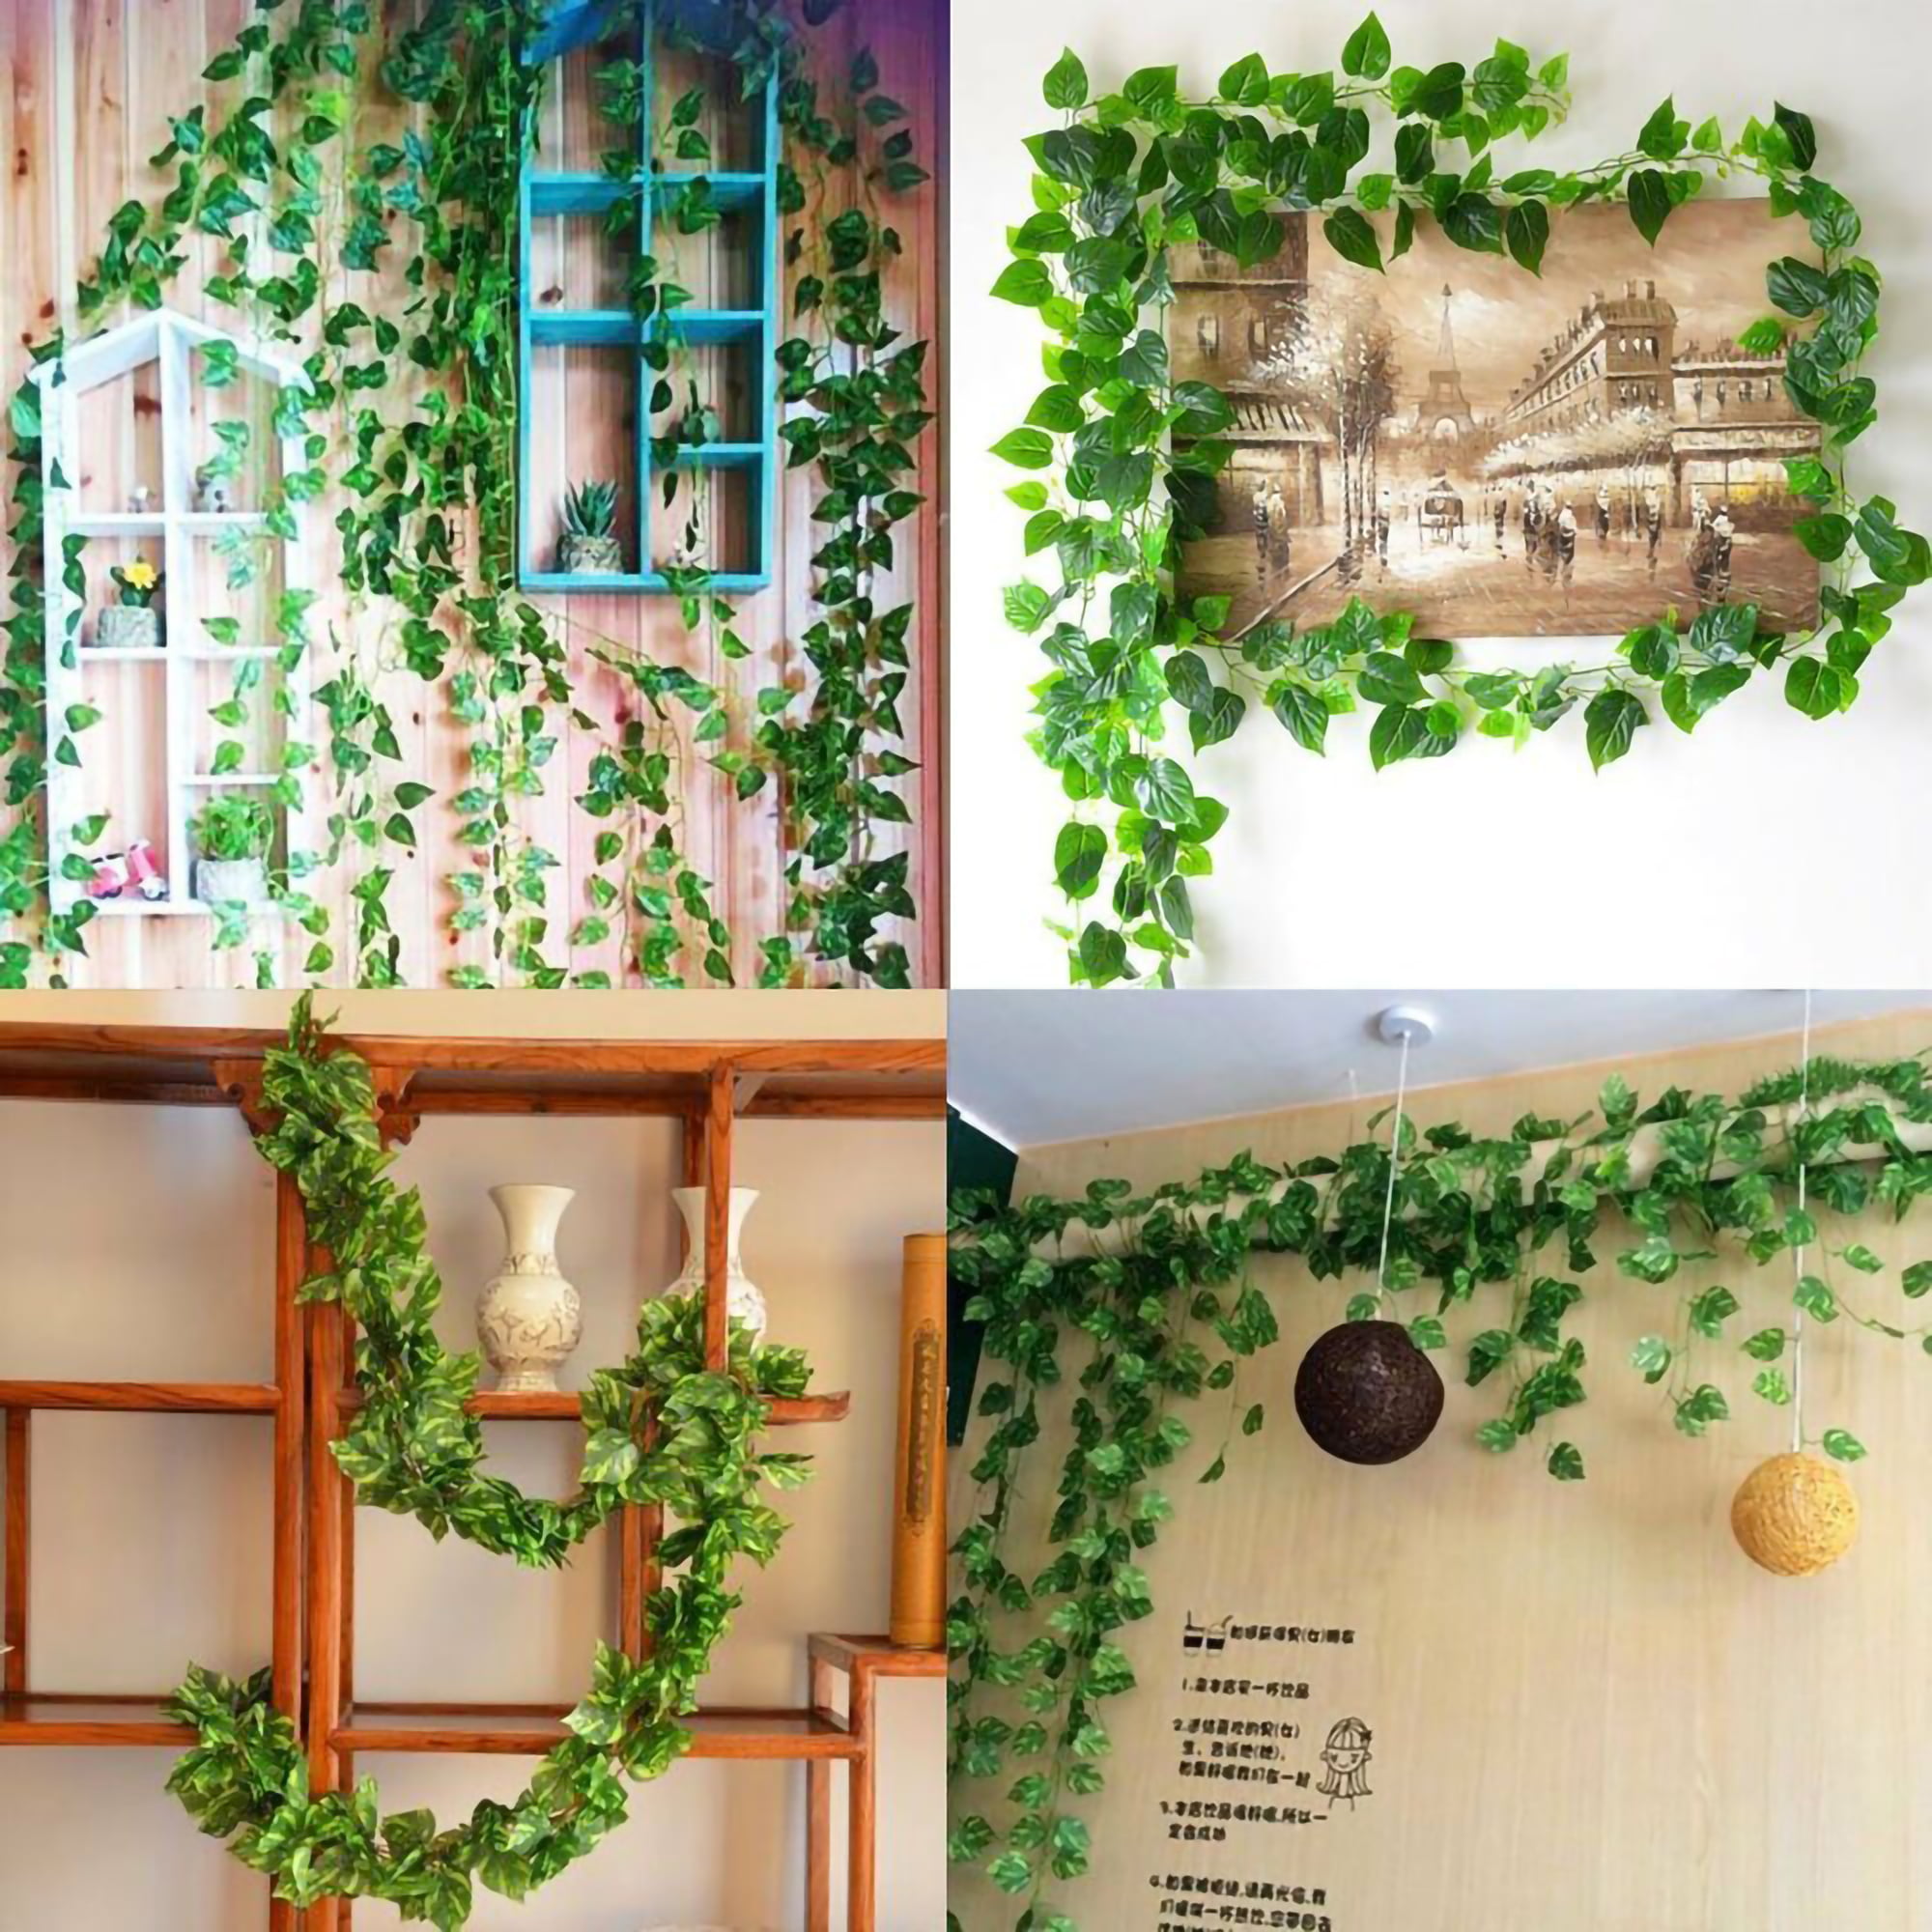 Hanging Flower Wall Decor Artificial Vine Plants Hanging Ivy Green Leaves  Garden Decoration Garland Grape Fake Greenery Plant Home Accessories From  Jaydaxia, $12.38